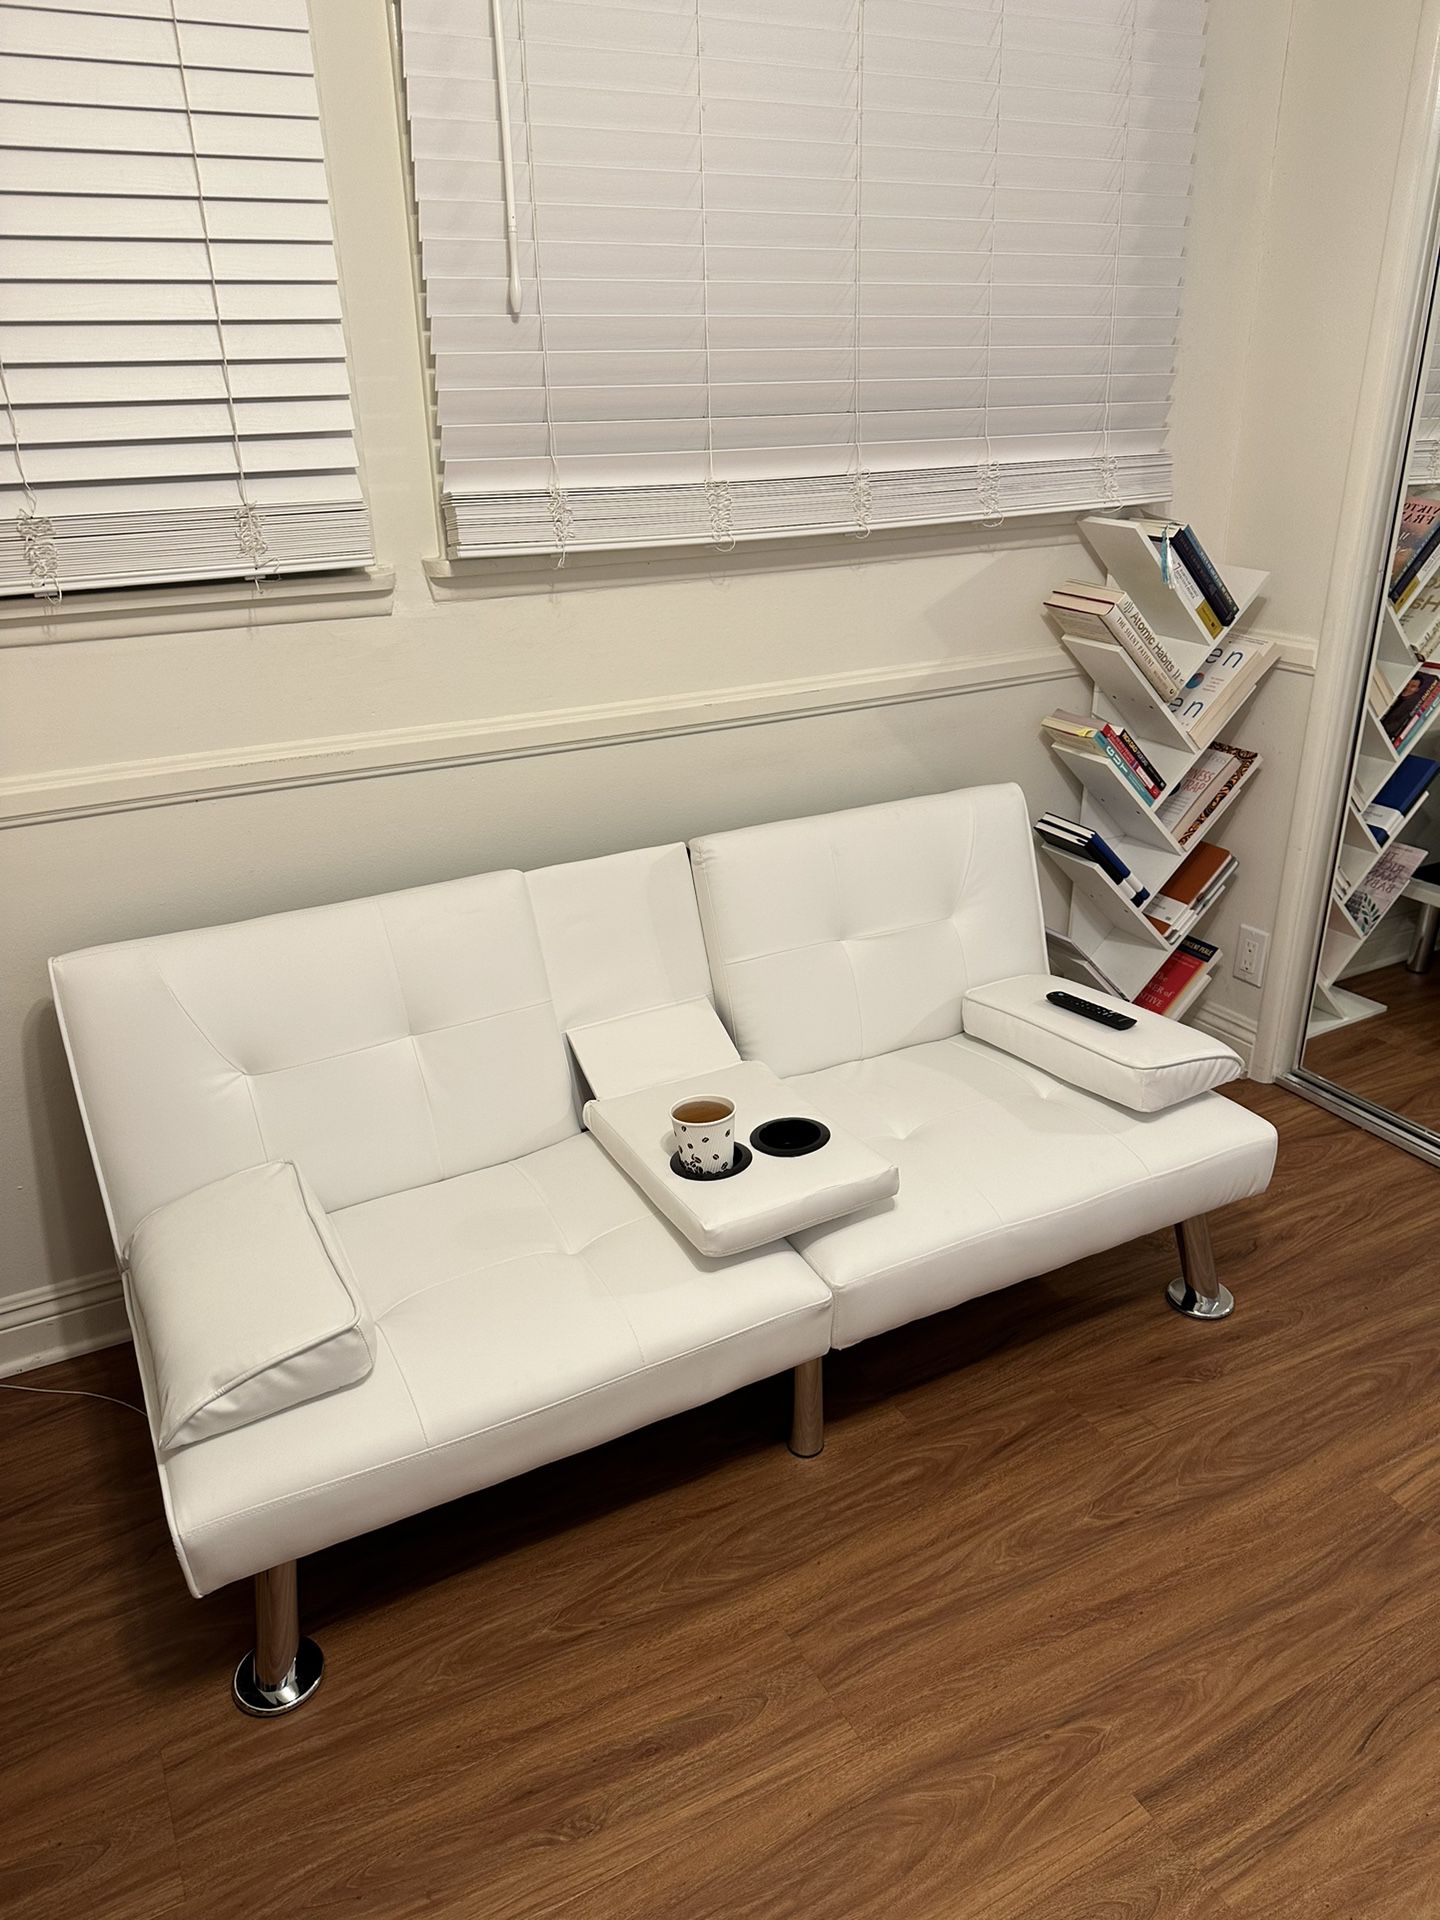 White Faux Leather Couch / Sofa Bed for Bedroom or Office Space